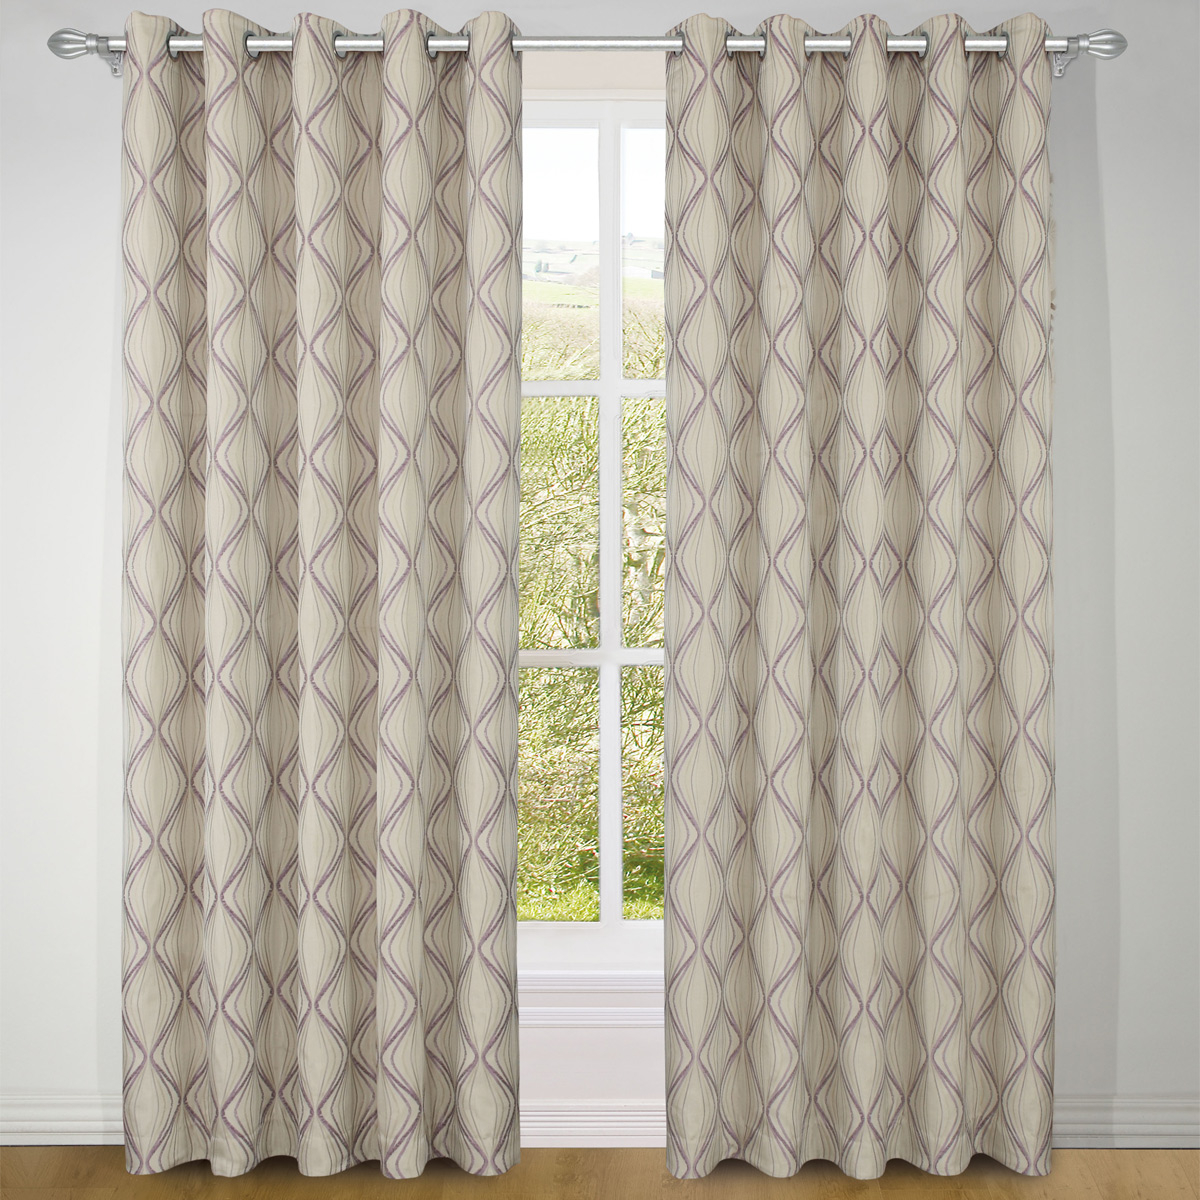 Moroccan Curtains Visualhunt, Moroccan Tile Curtains Bedroom